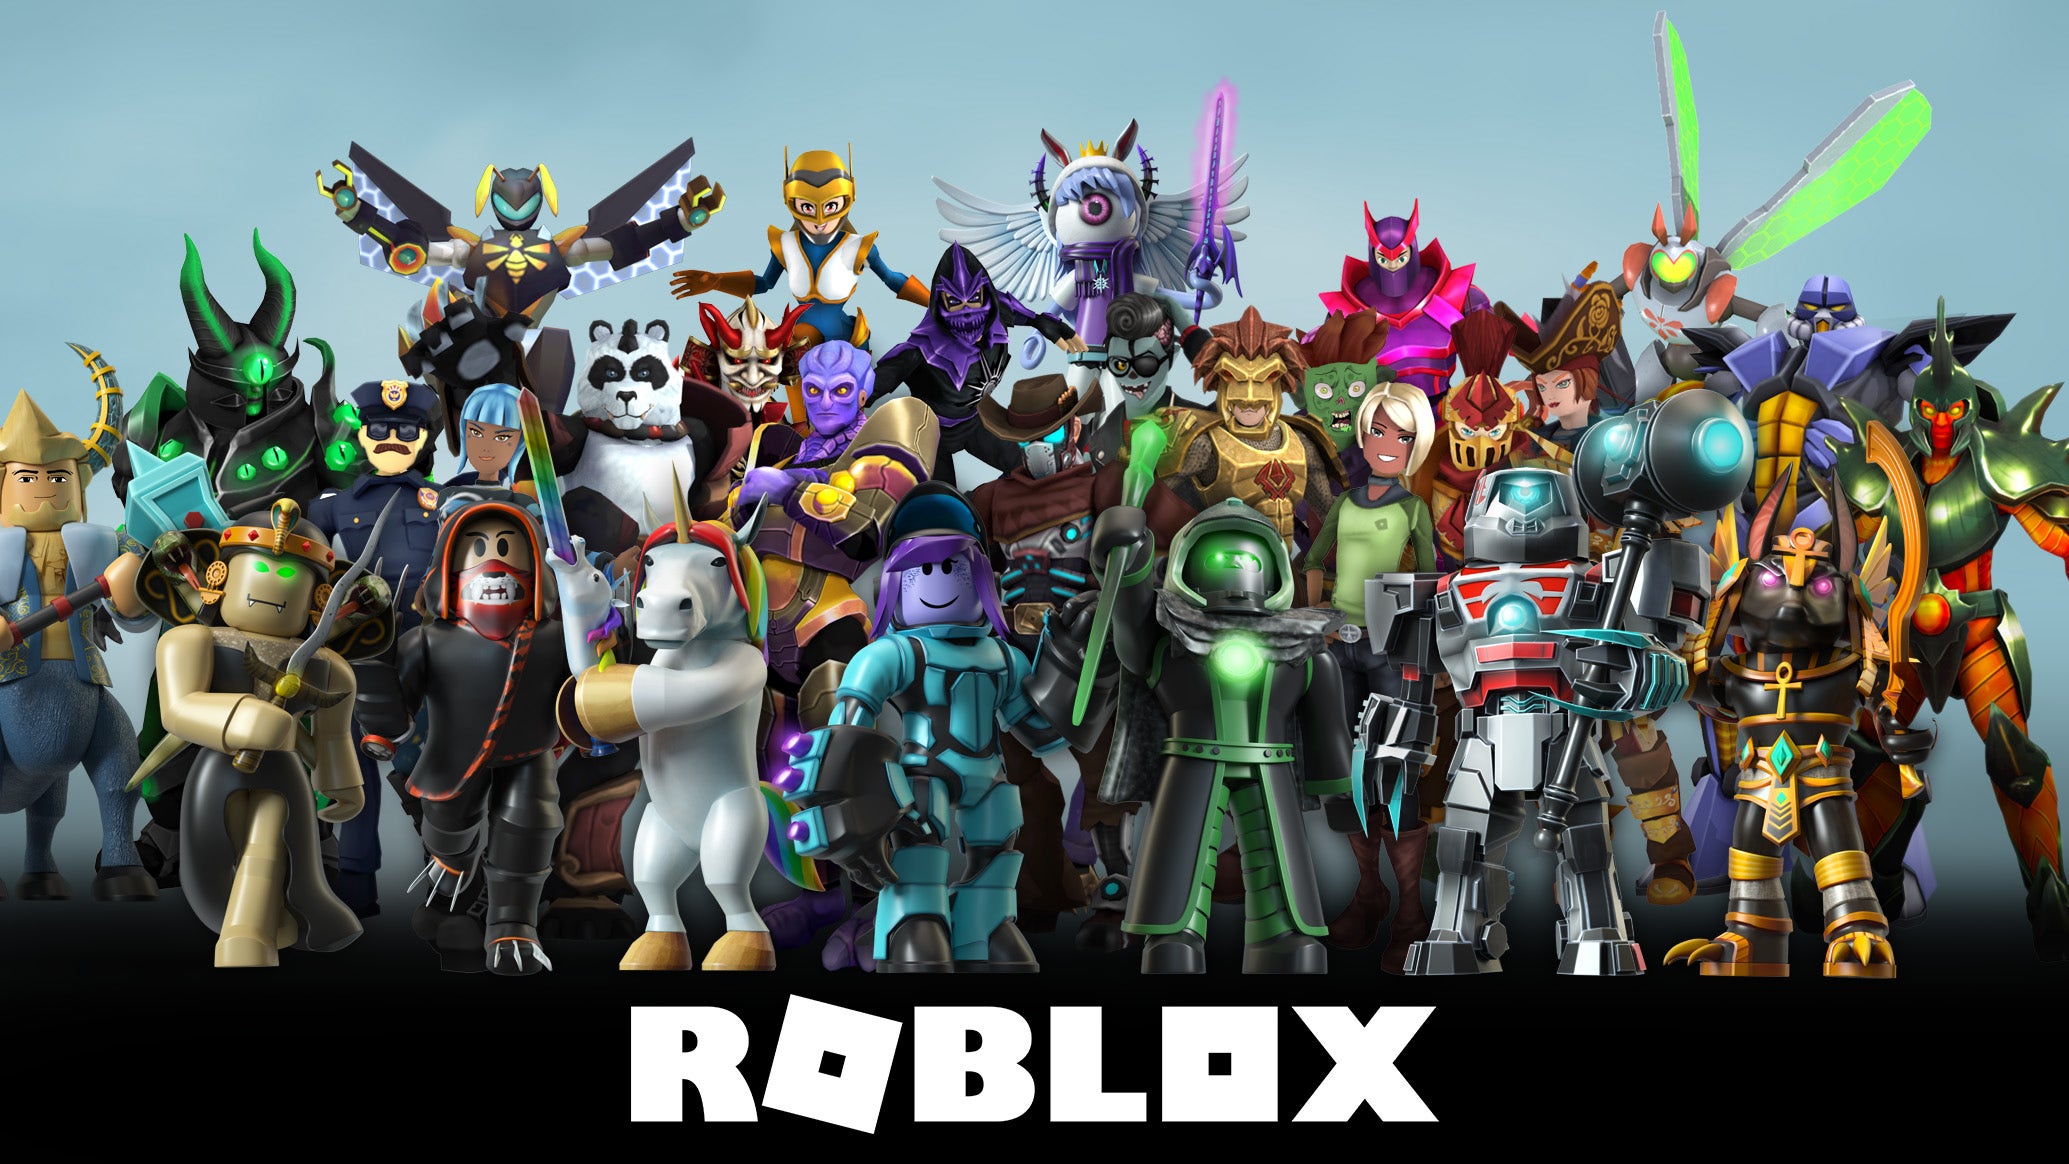 Roblox Q3 Earnings Highlights: Revenue Up 102%, DAUs Hit 47.3M, October DAUs Grow Before Outage